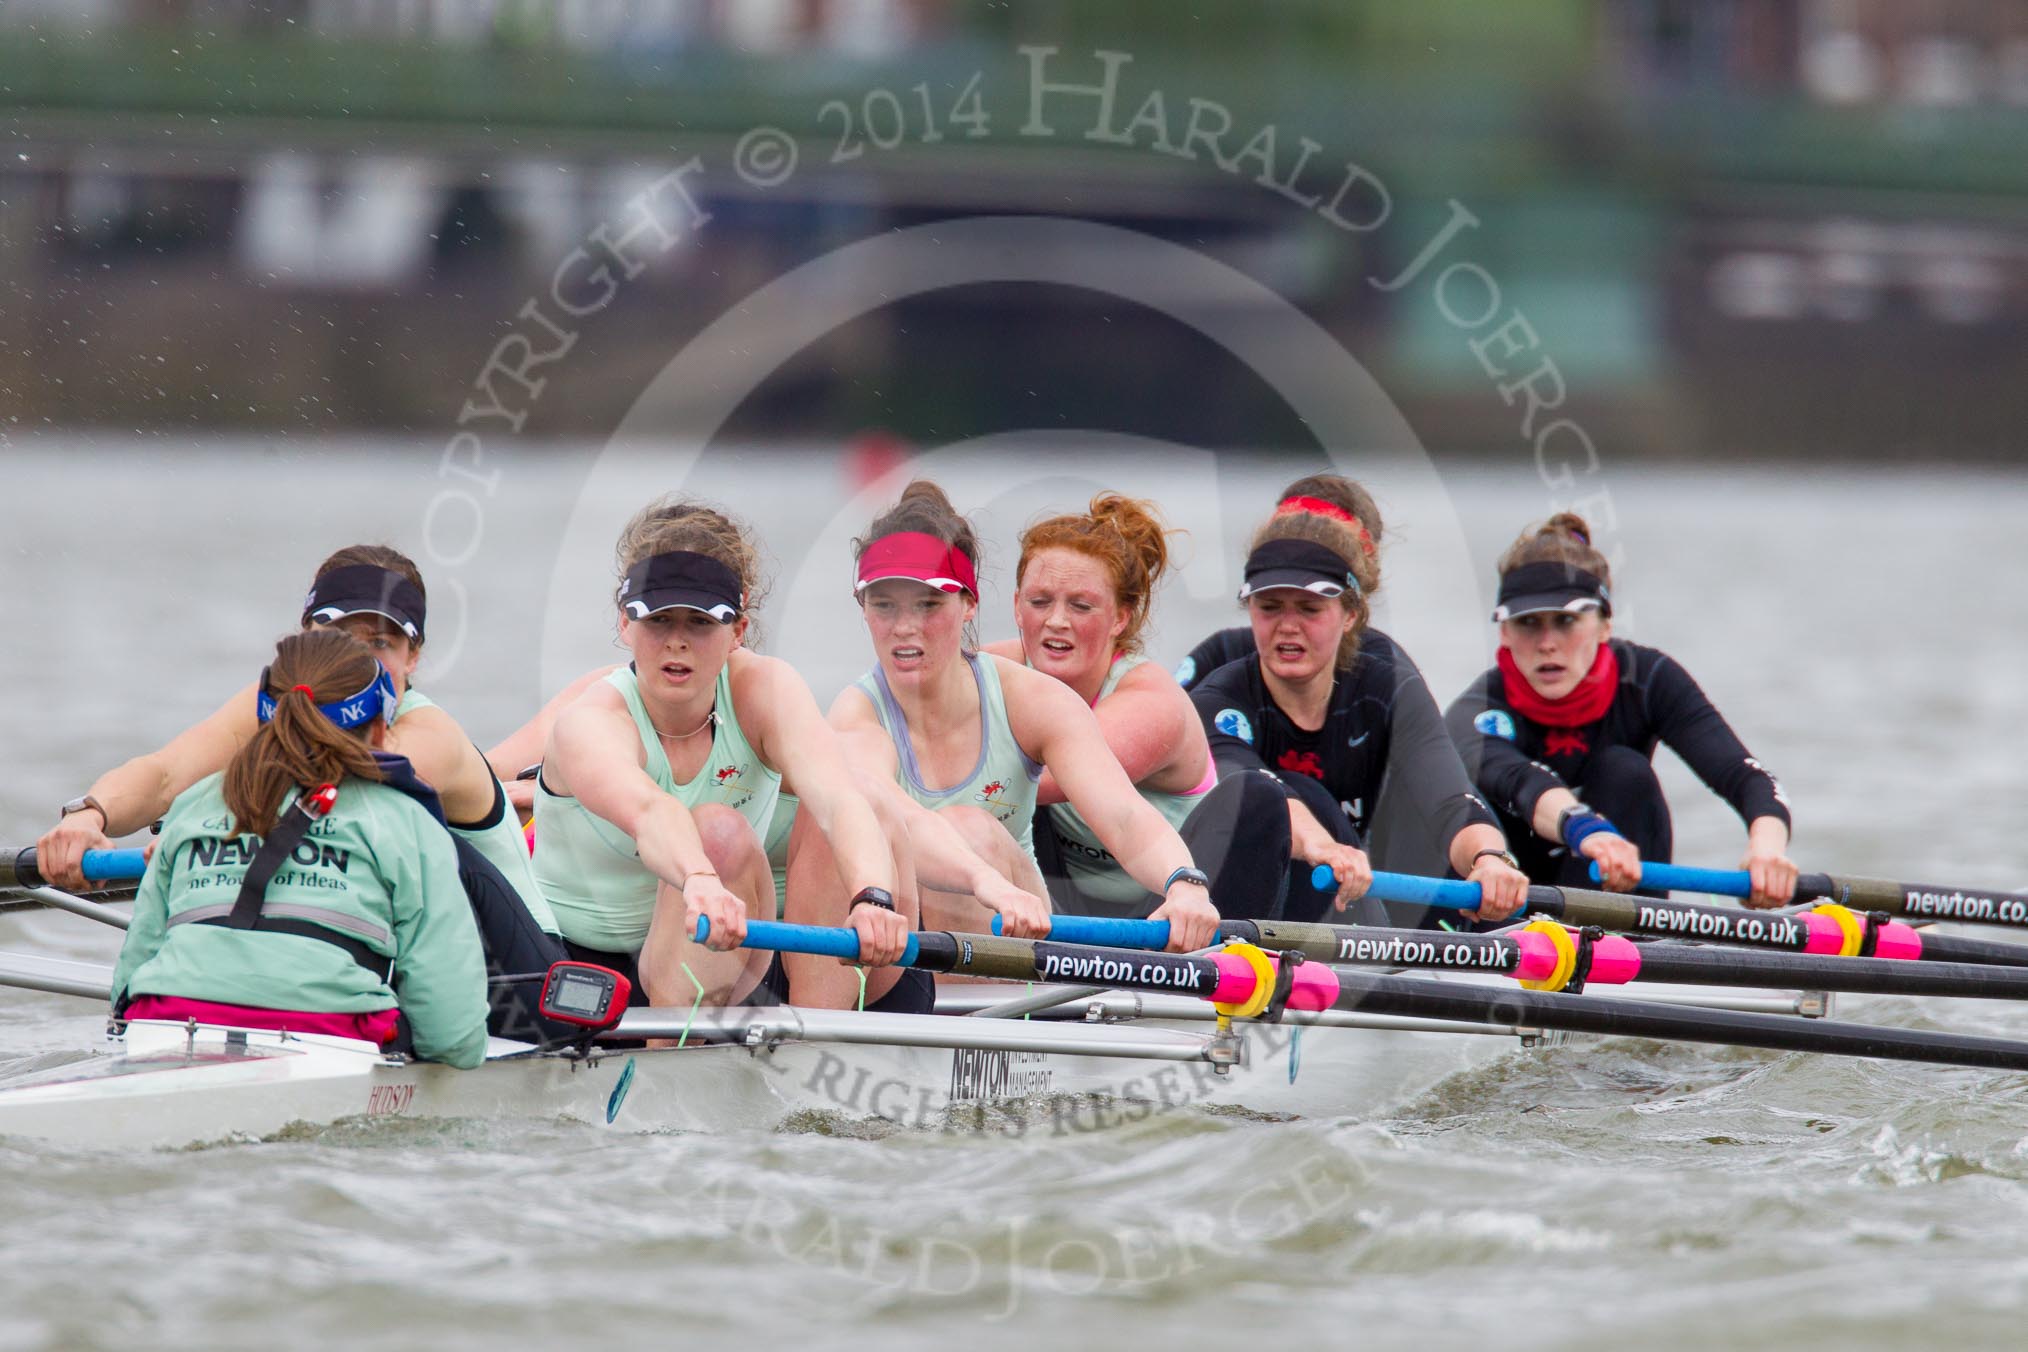 The Boat Race season 2014 - fixture CUWBC vs Thames RC.




on 02 March 2014 at 13:15, image #108